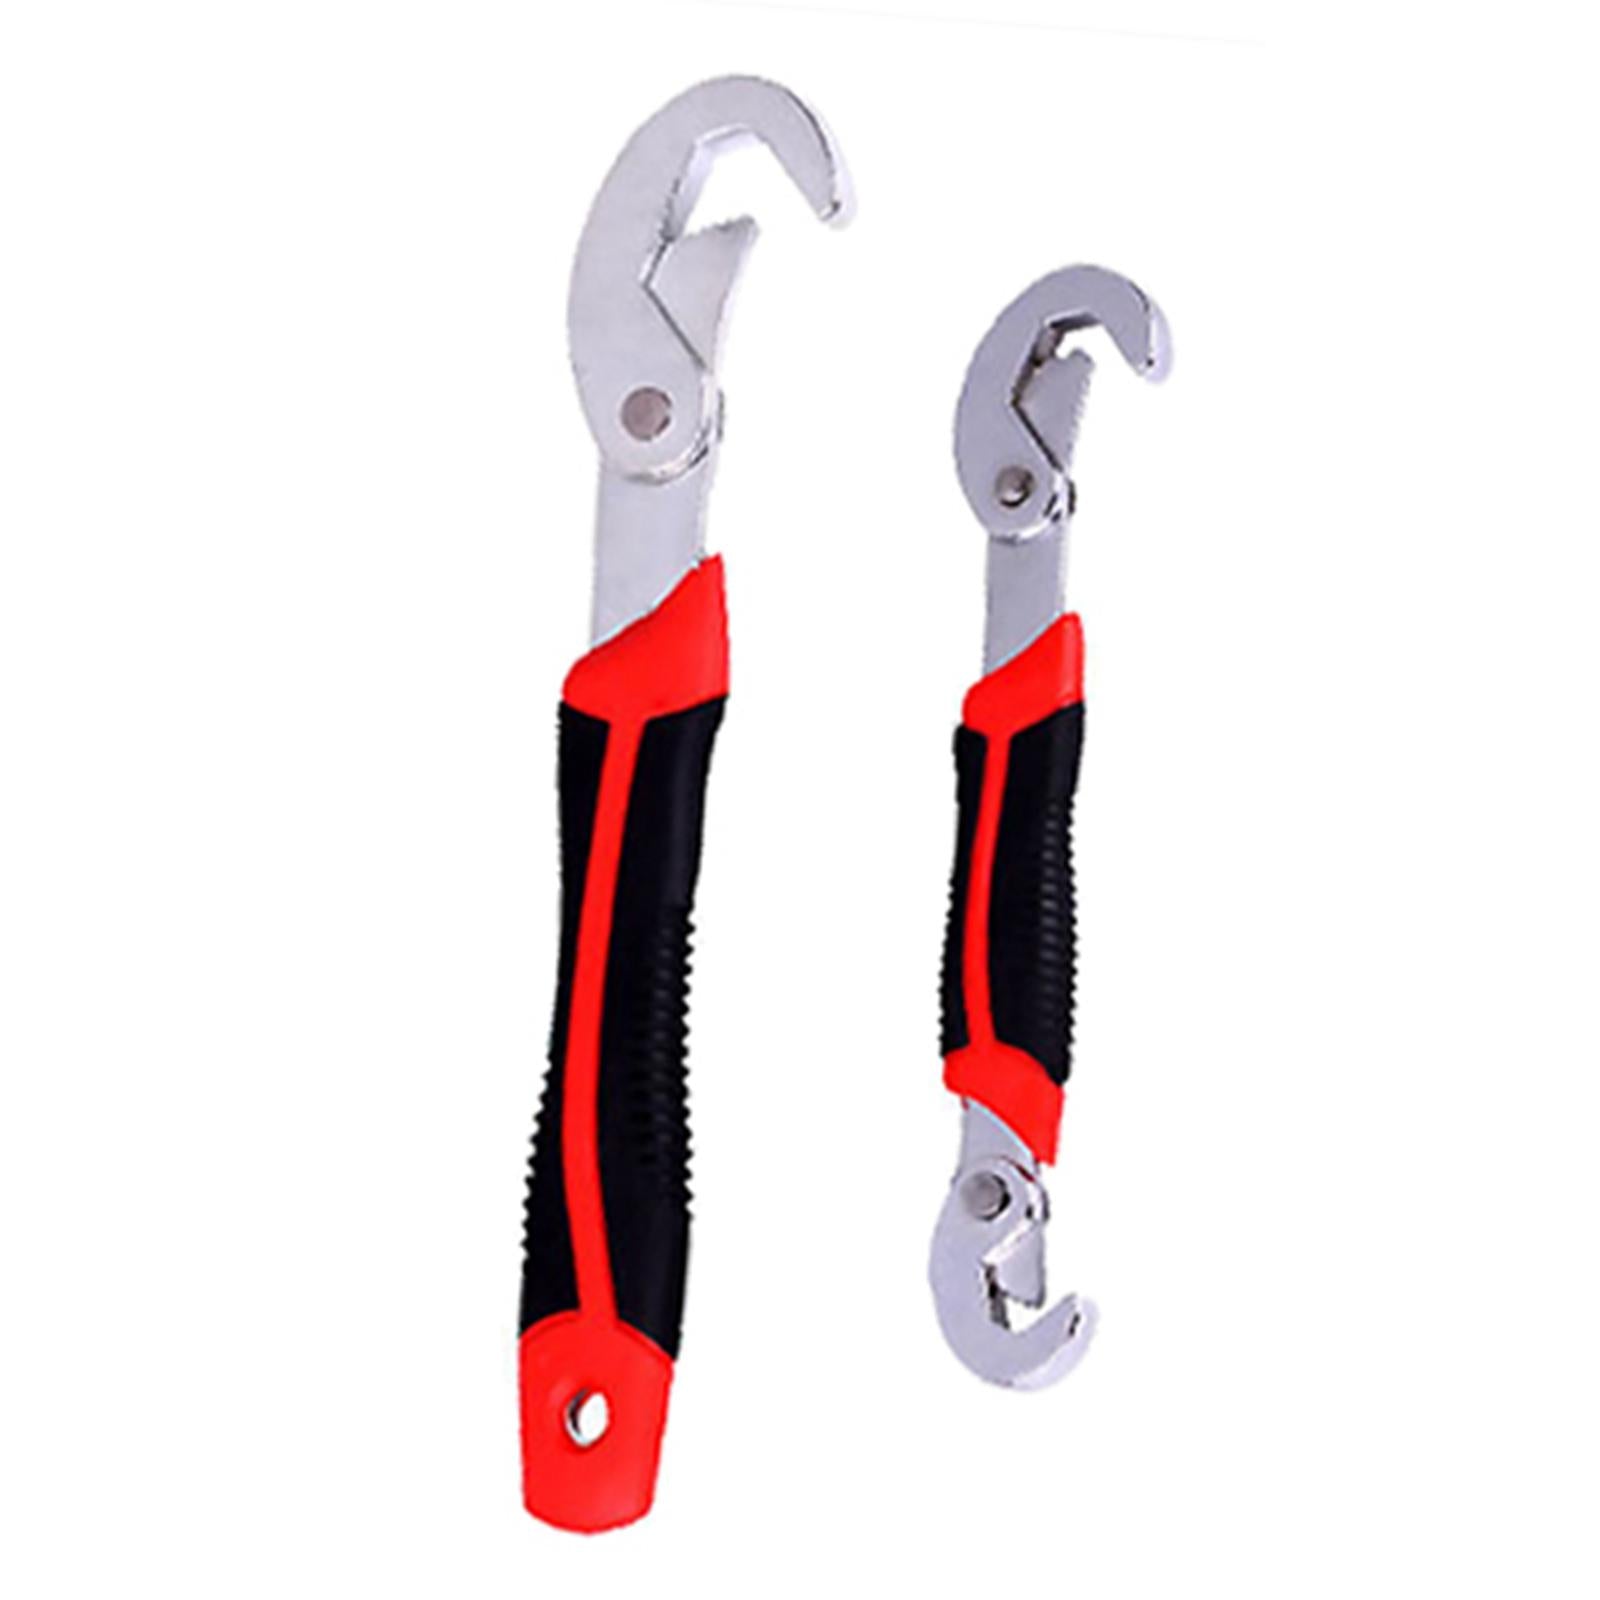 Universal Quick Snap Grip Wrench Repair Tool Steel for Home Kitchen Garden 2pcs